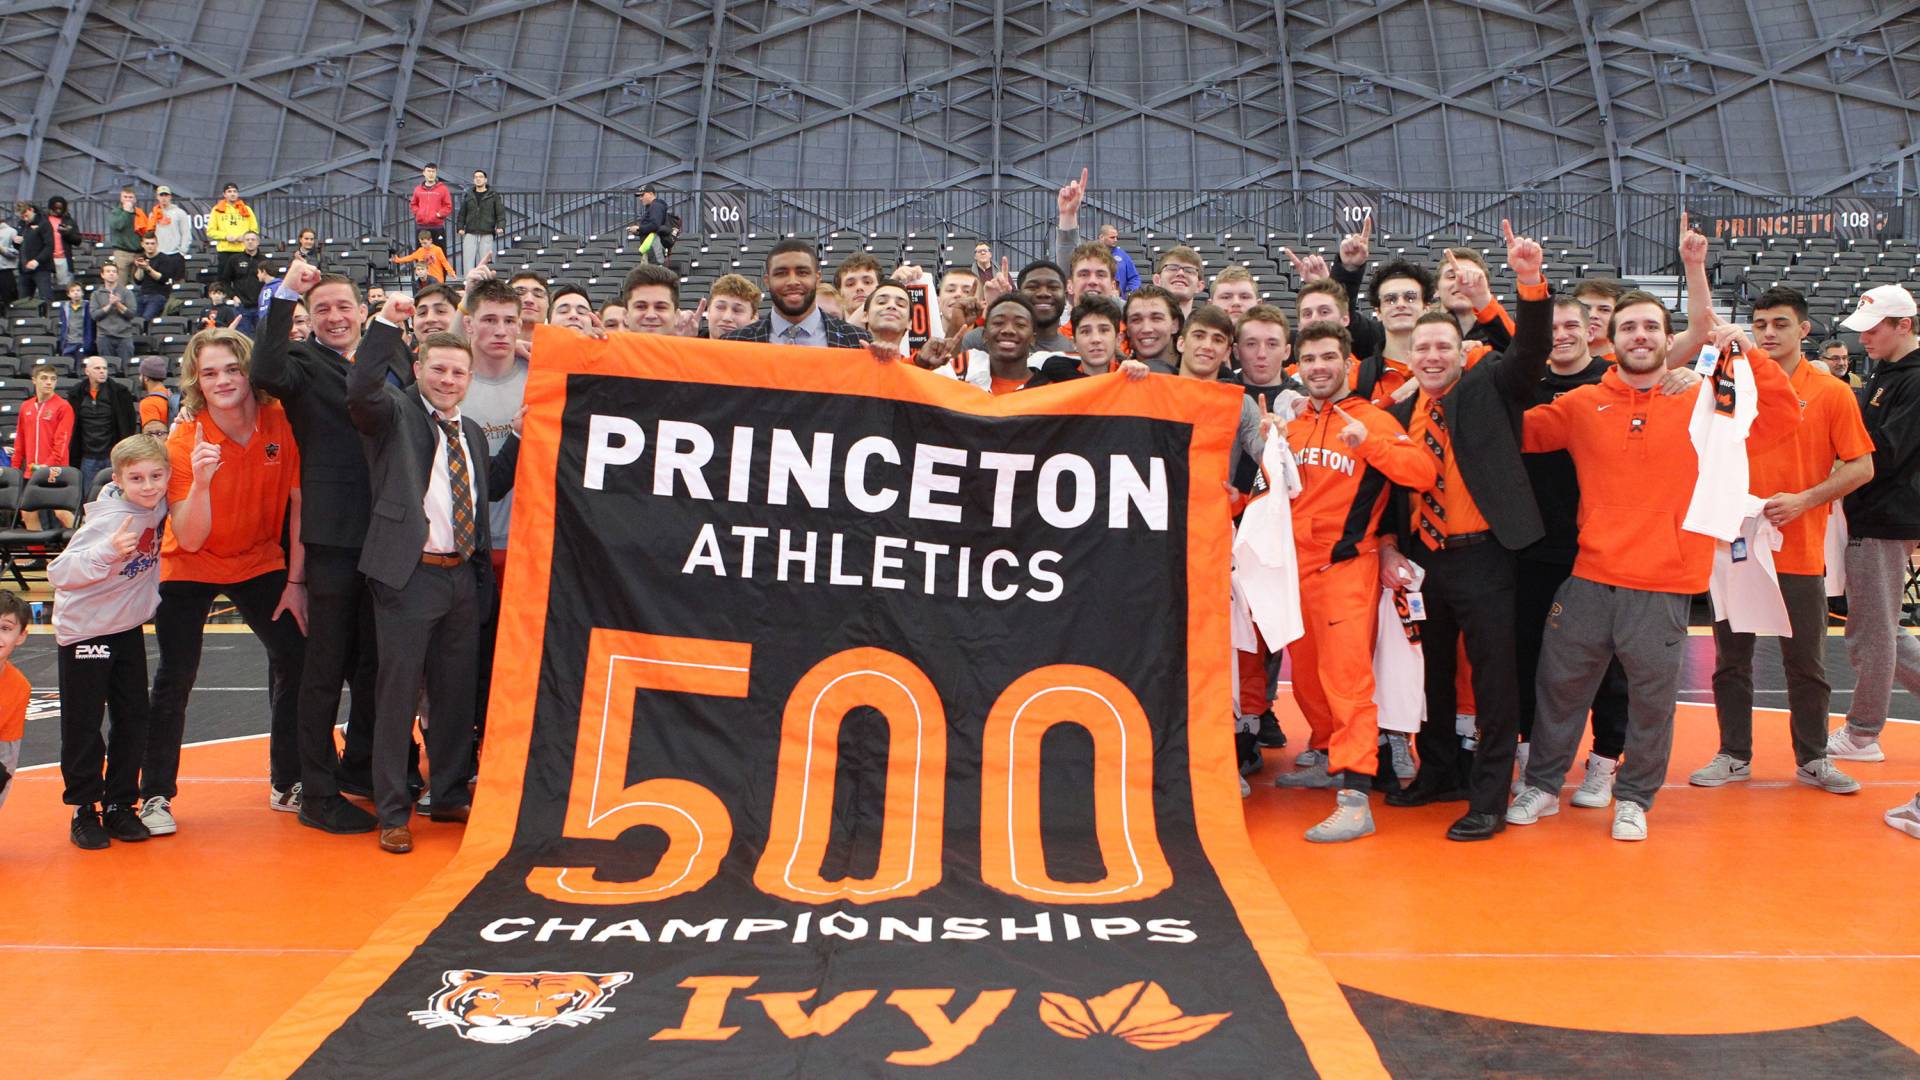 A group poses with a banner that reads, Princeton Athletics 500 Championships Ivy"